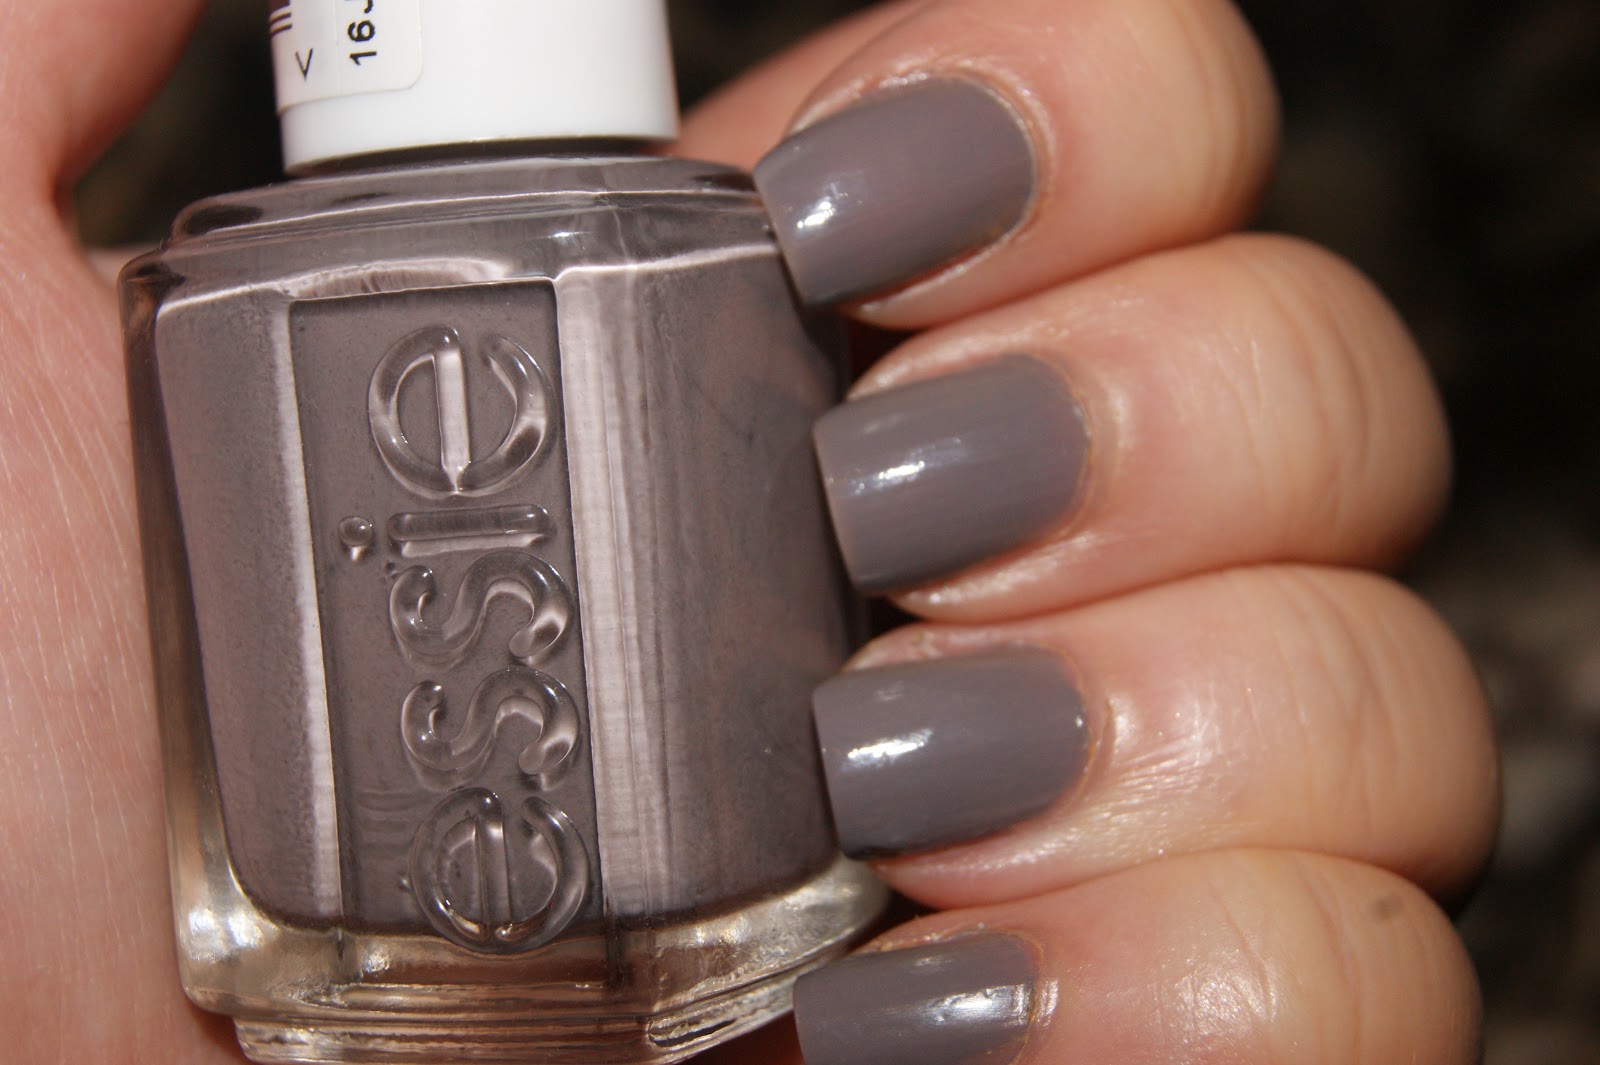 Essie Nail Polish in "Chinchilly" - wide 8